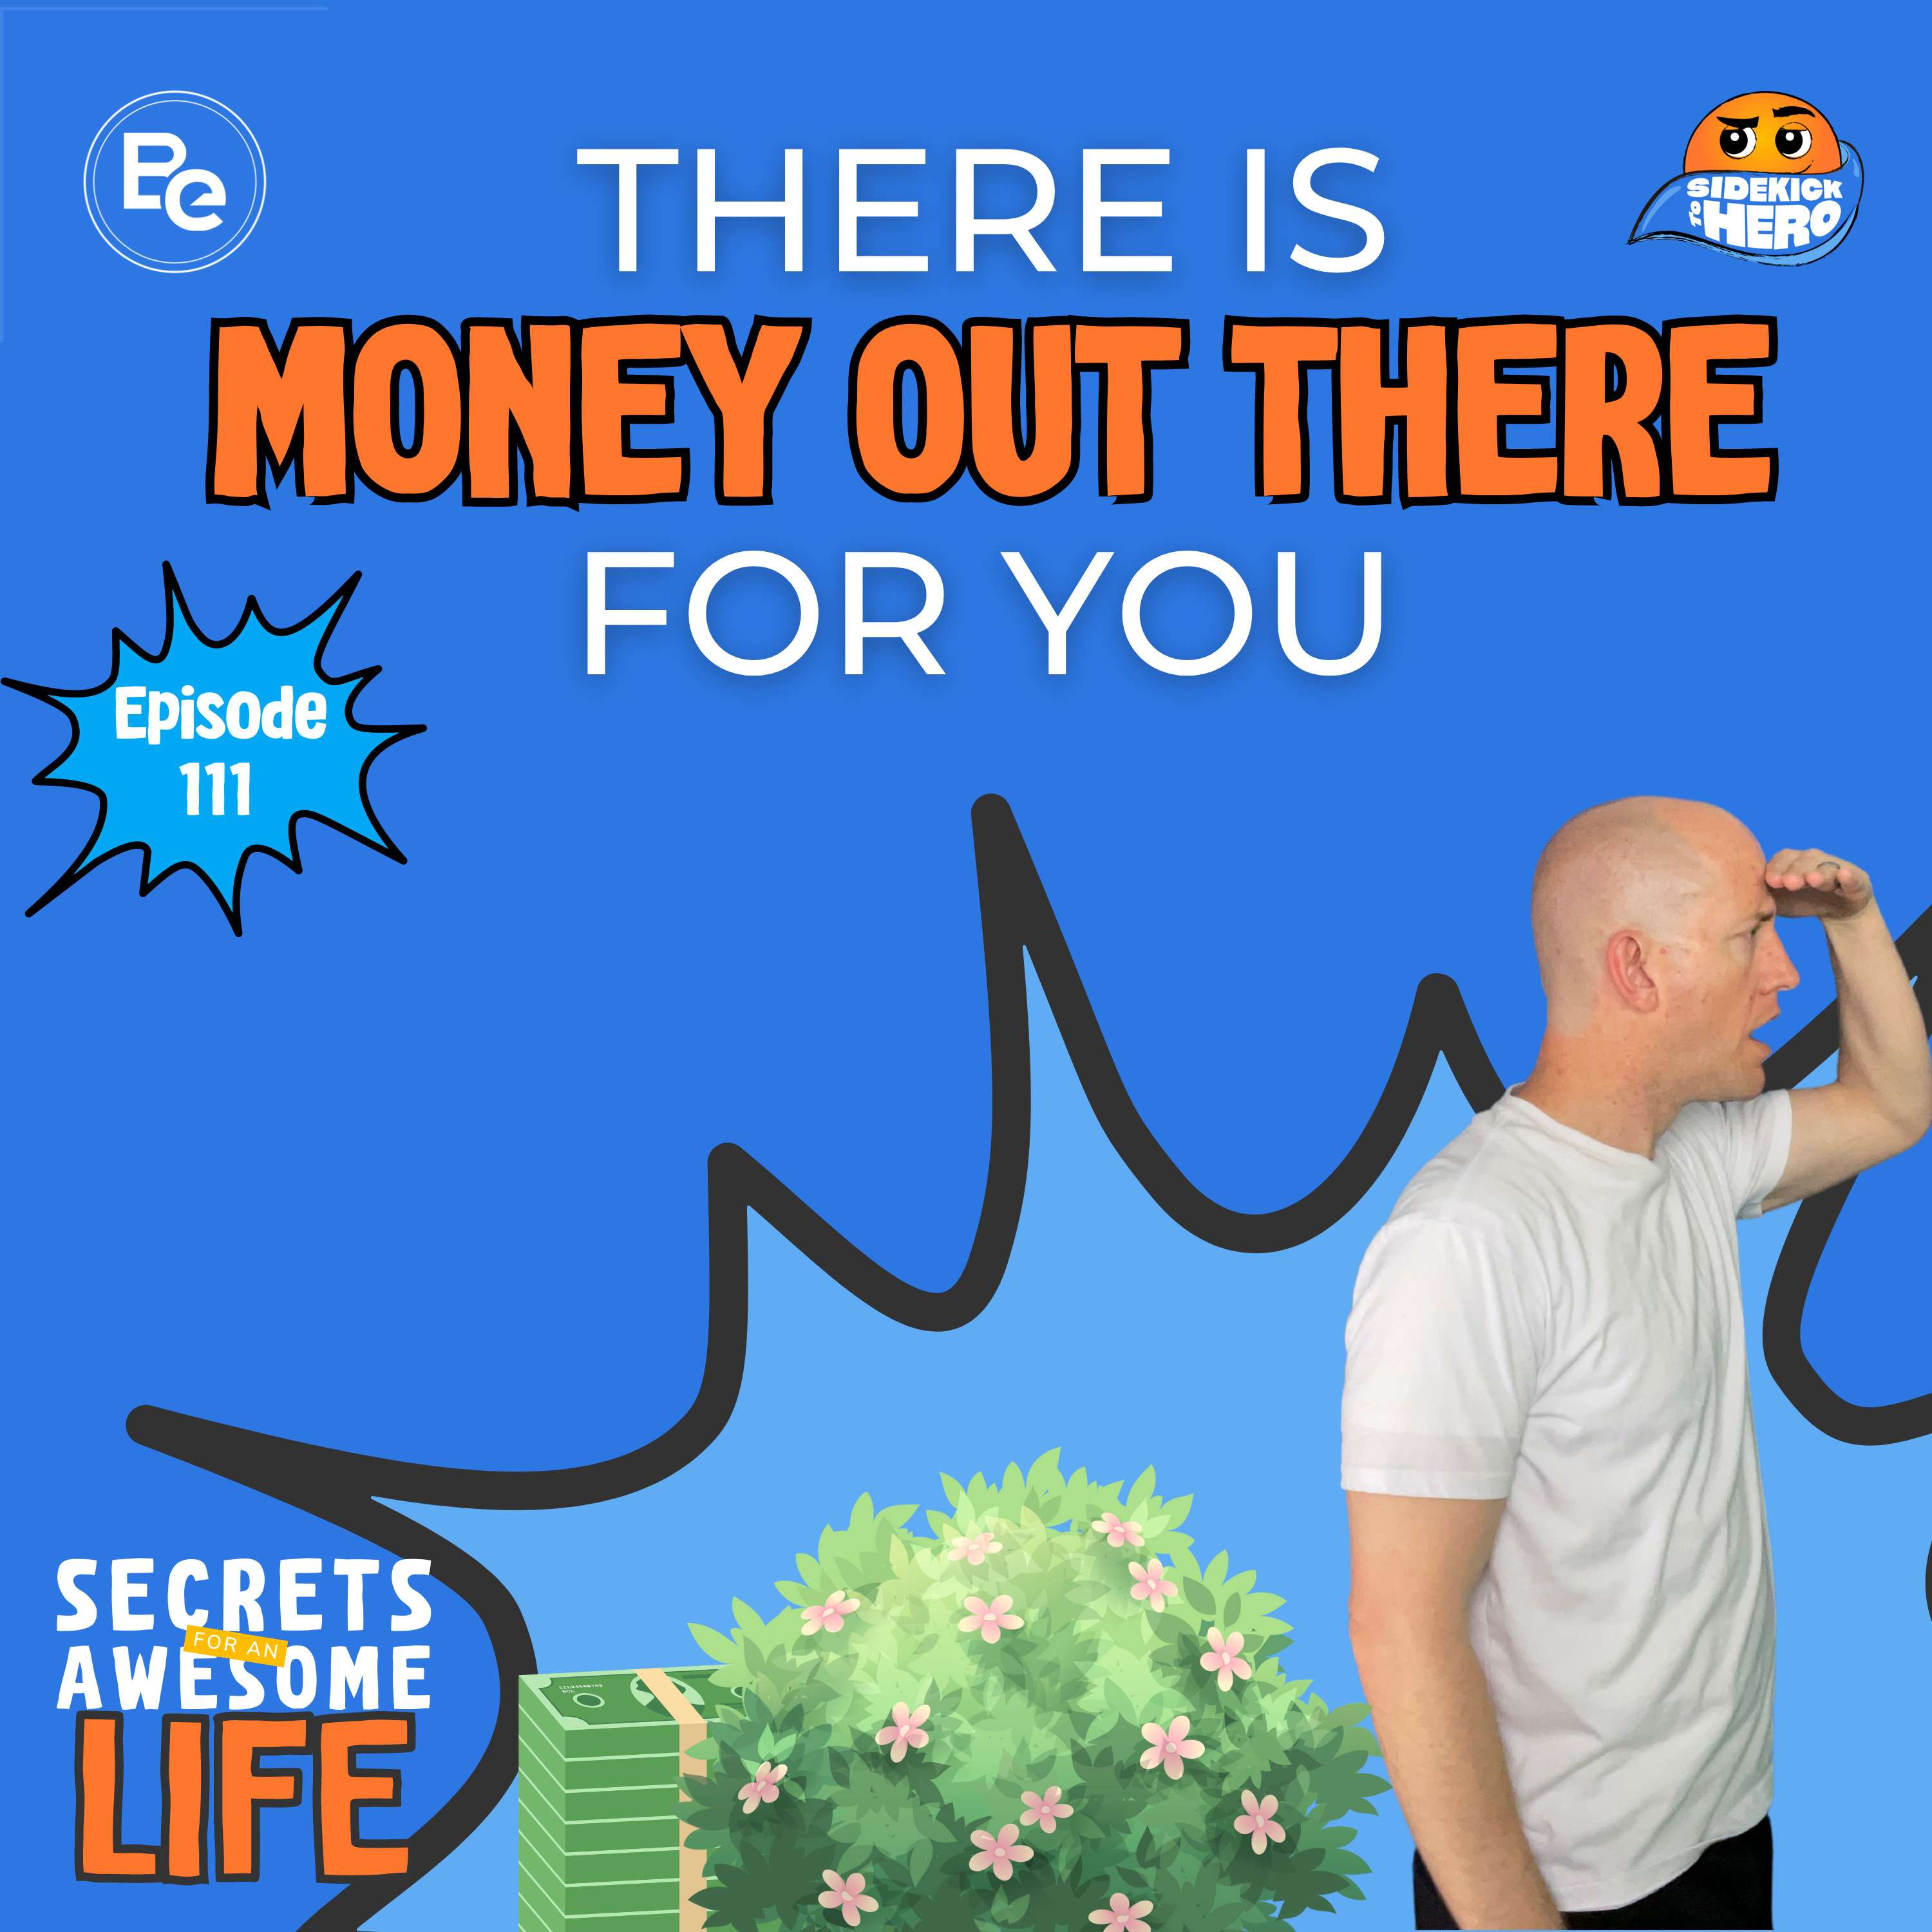 There is Money Out There For You